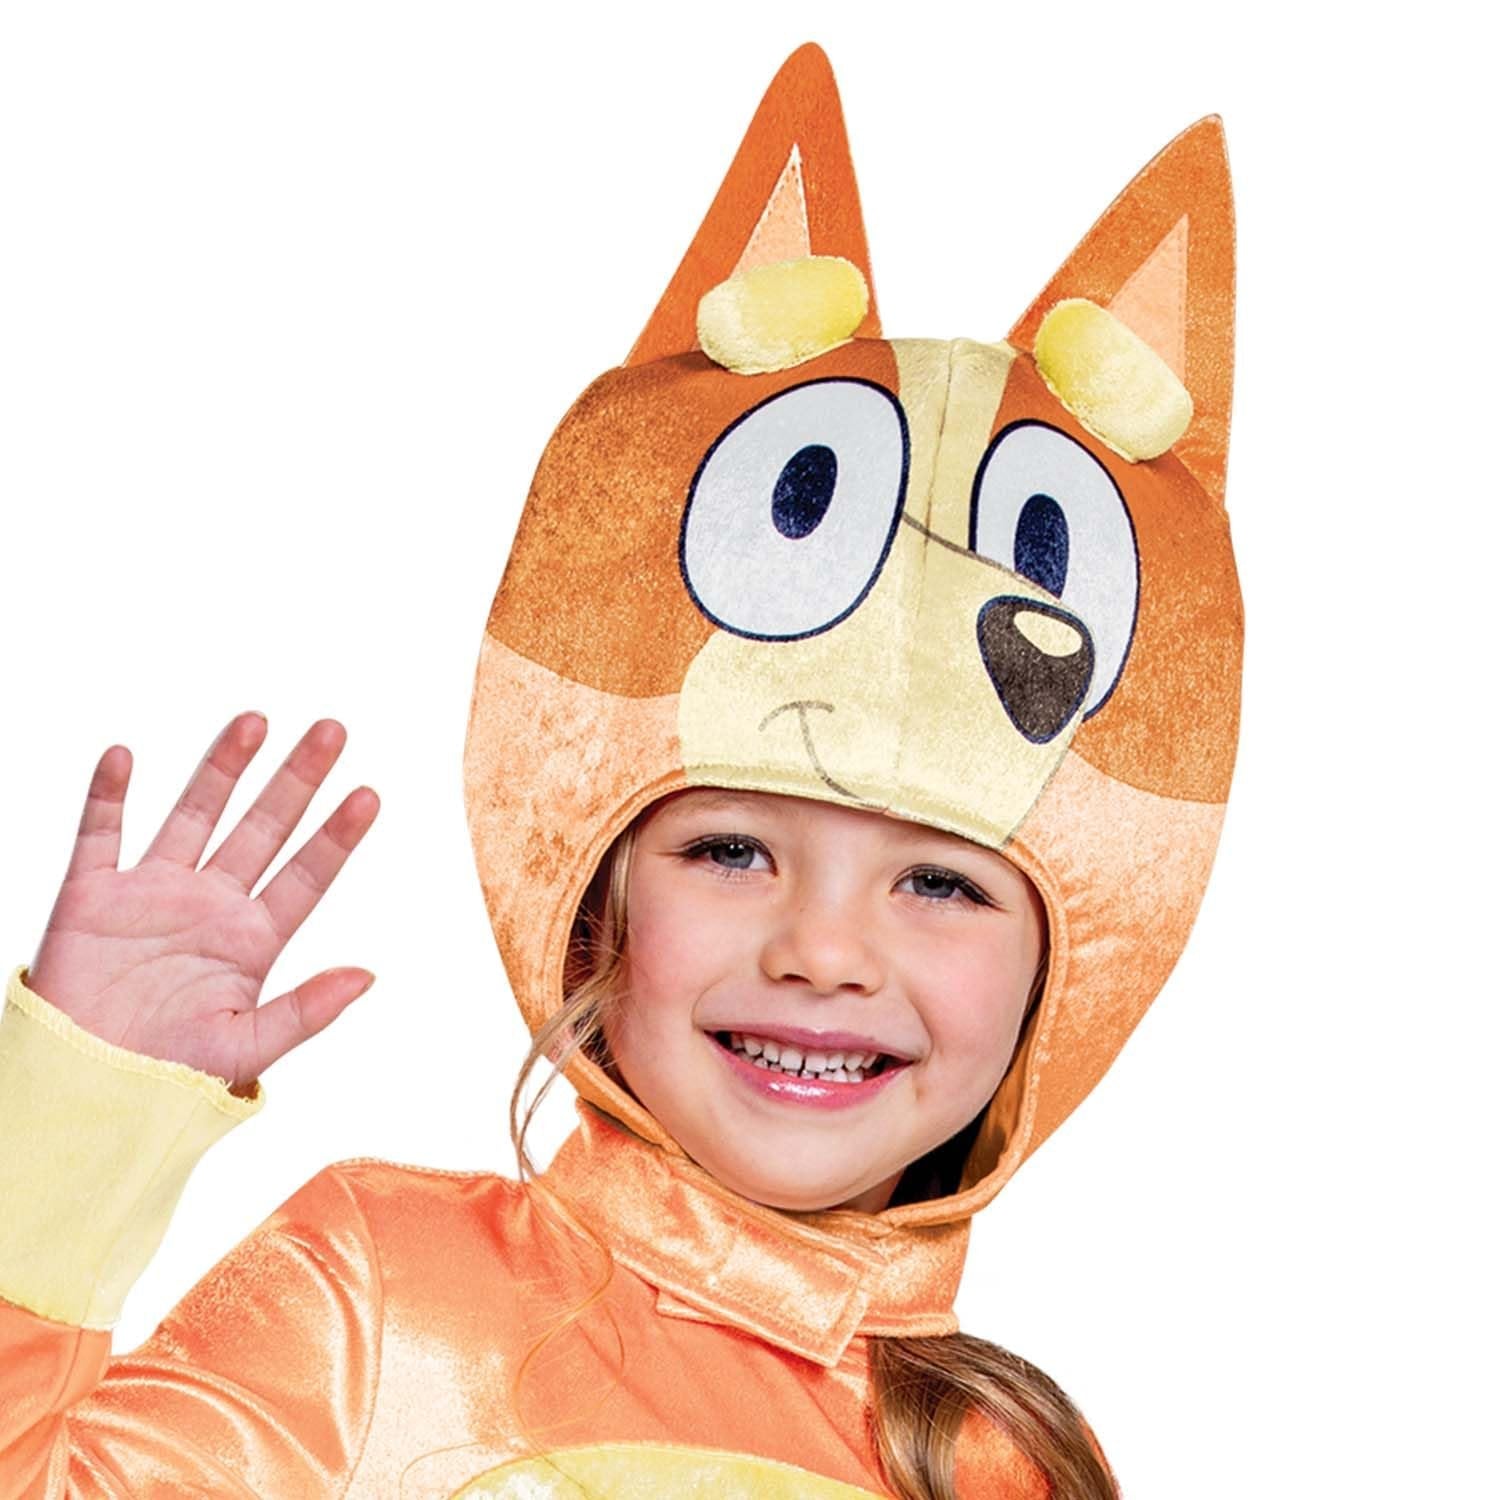 Disguise Bingo Costume for Kids, Official Bluey Character Outfit with Jumpsuit and Mask, Classic Toddler Size Medium (3T-4T)